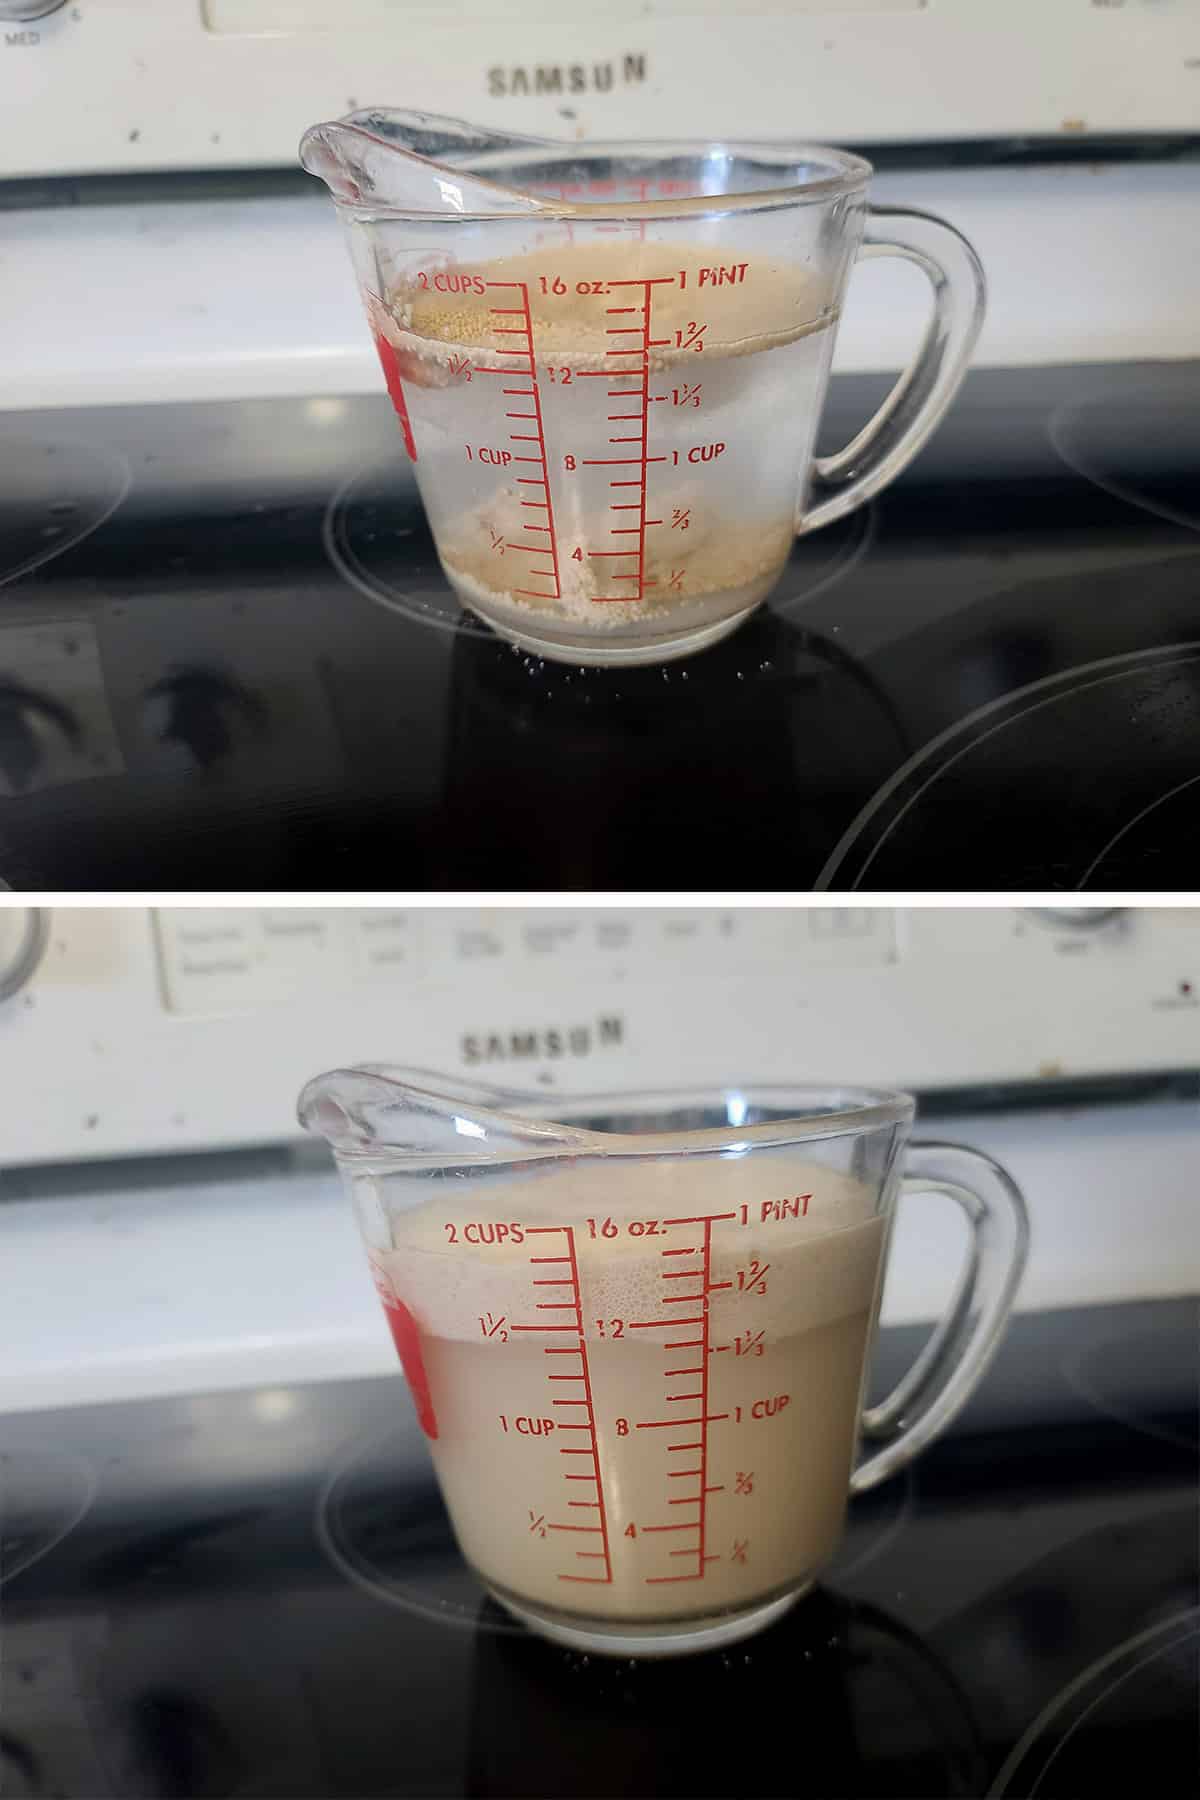 A 2 part image showing yeast and water in a measuring cup, before and after the yeast foamed up.